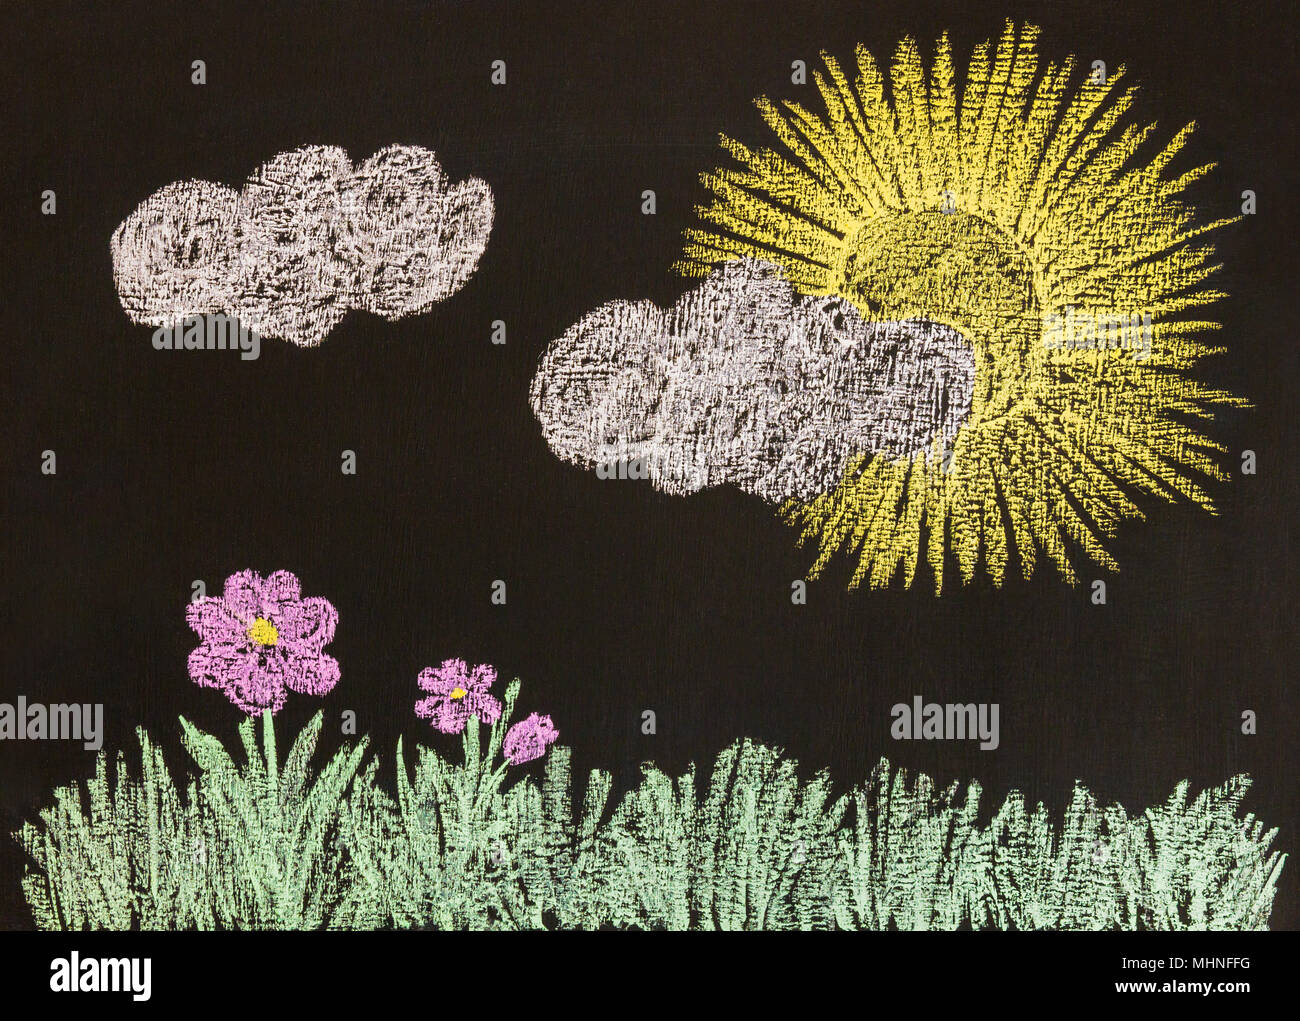 Chalk drawing of a landscape with grass, pink flowers, white clouds and sun on a blackboard drawing. Horizontal view. Stock Photo